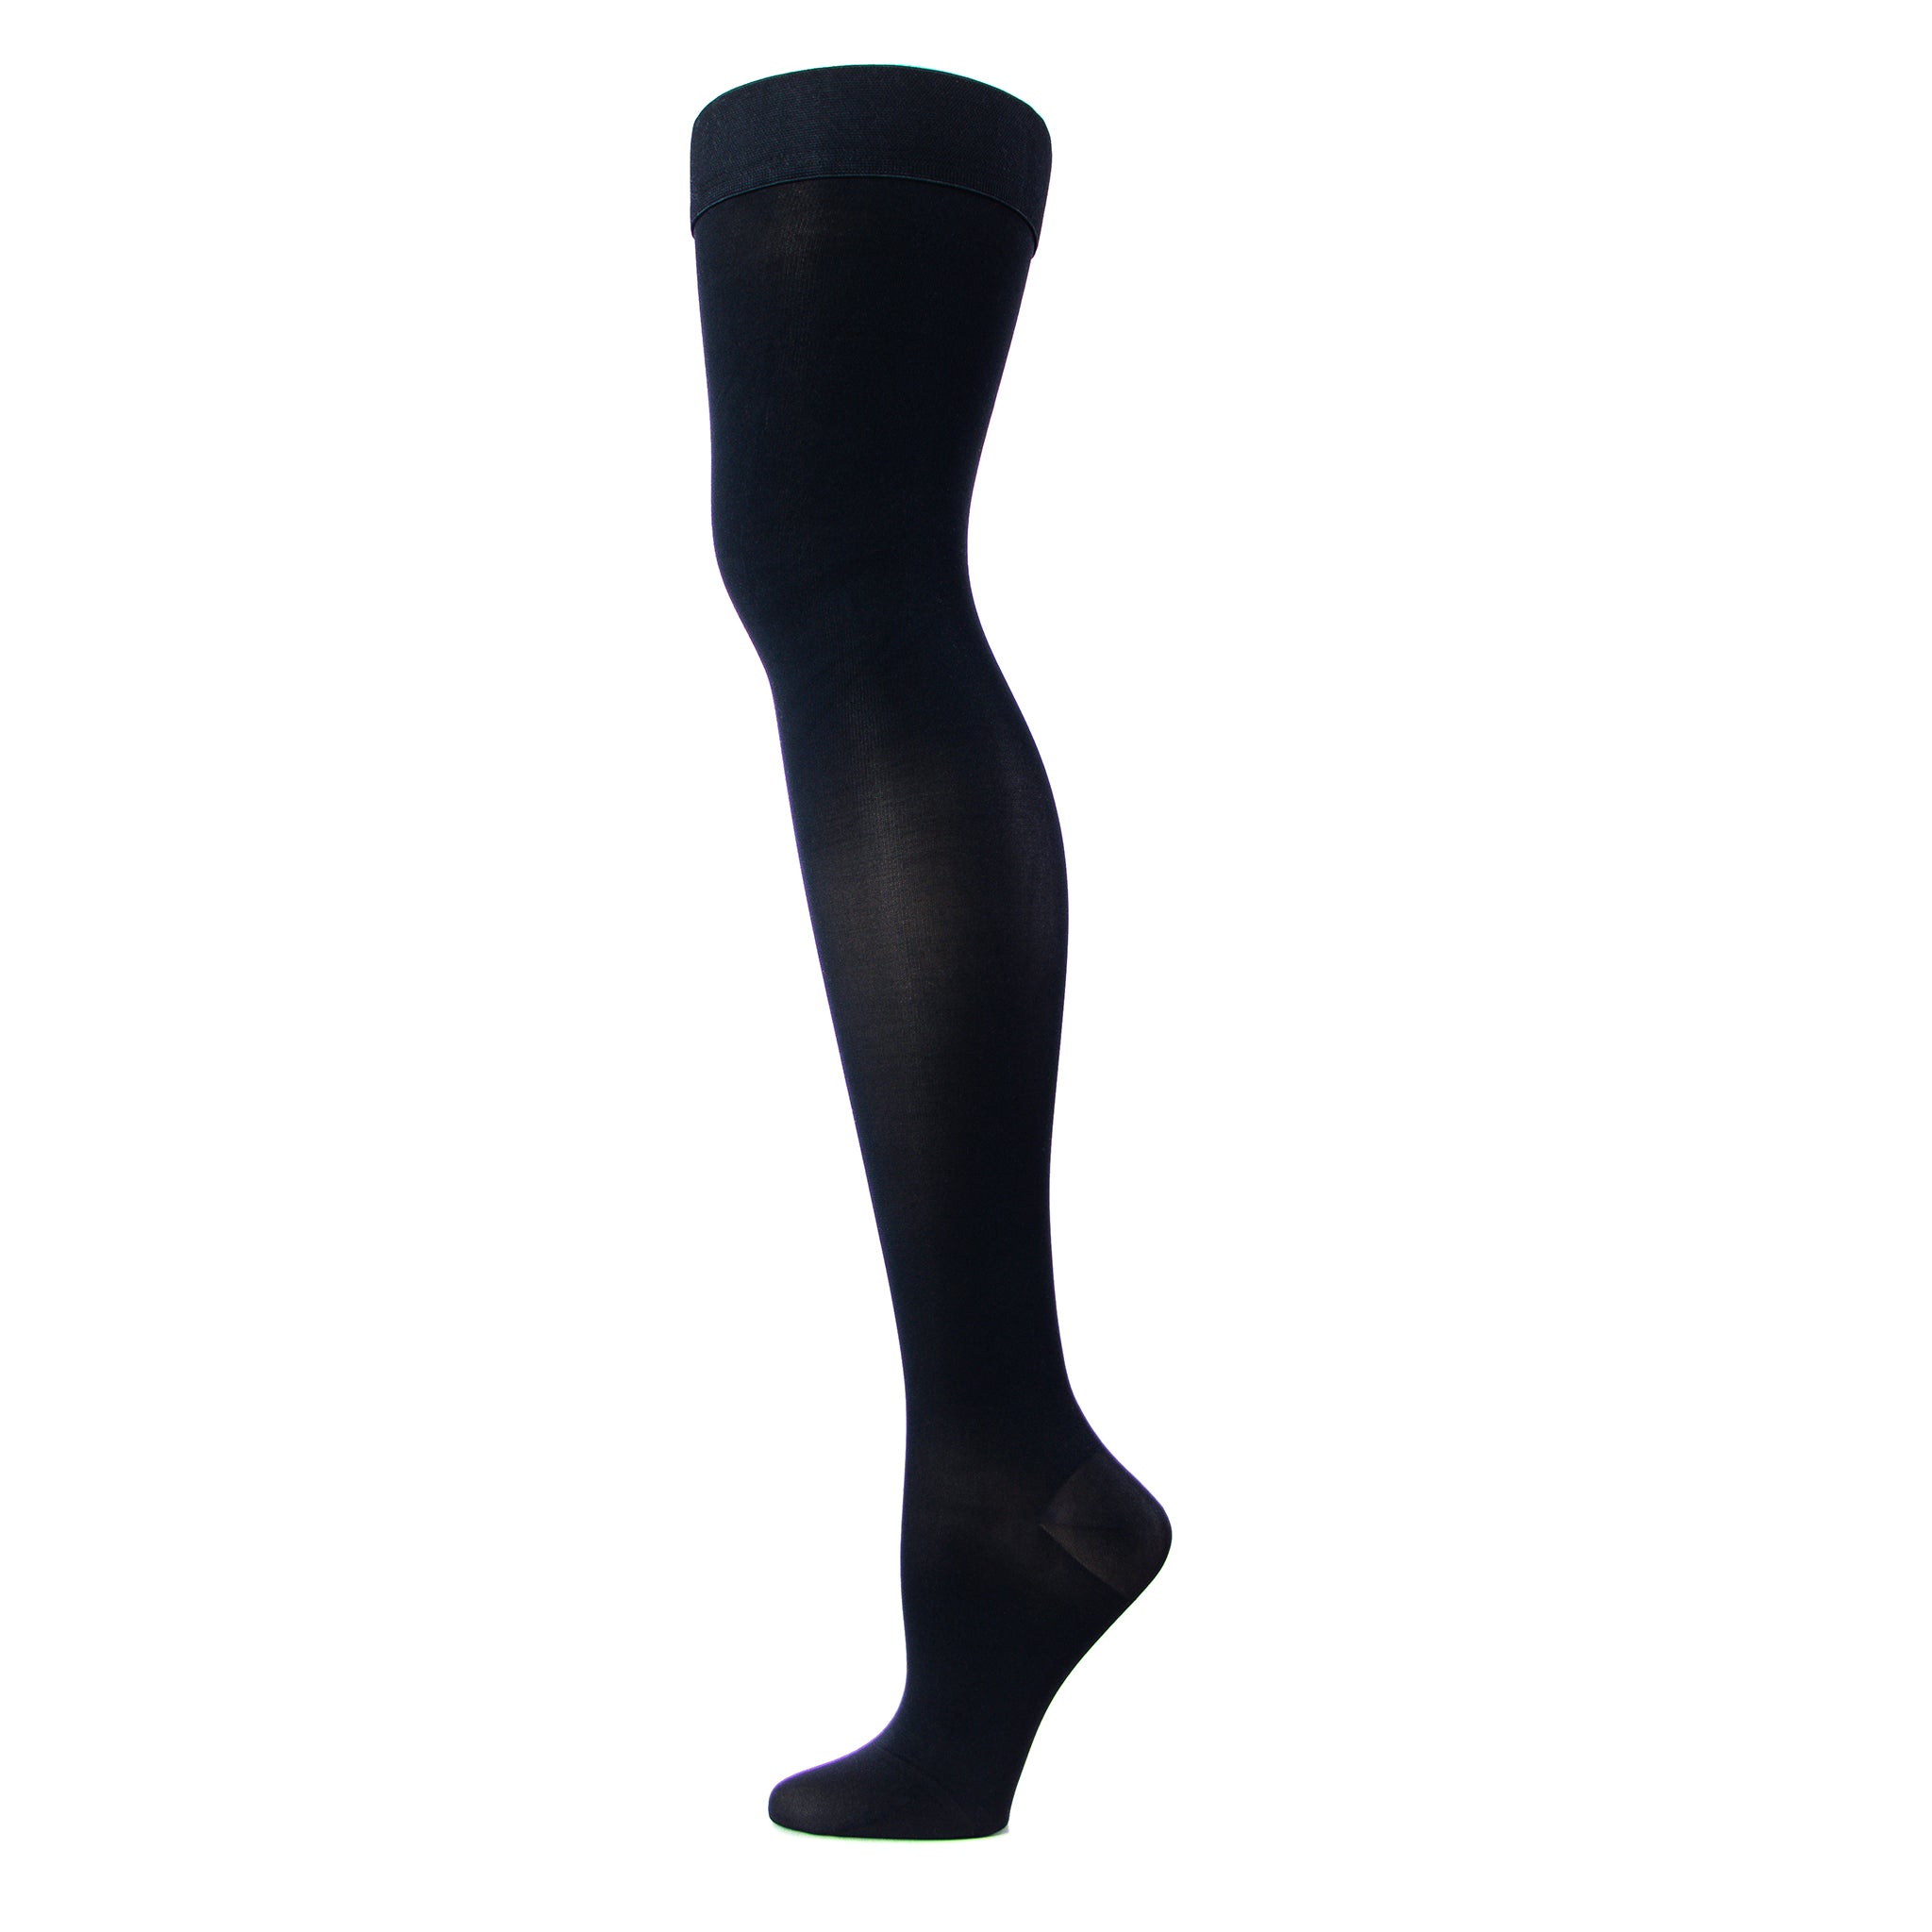 Thigh High Compression Socks For Women In 20 30 mmHg Circutrend